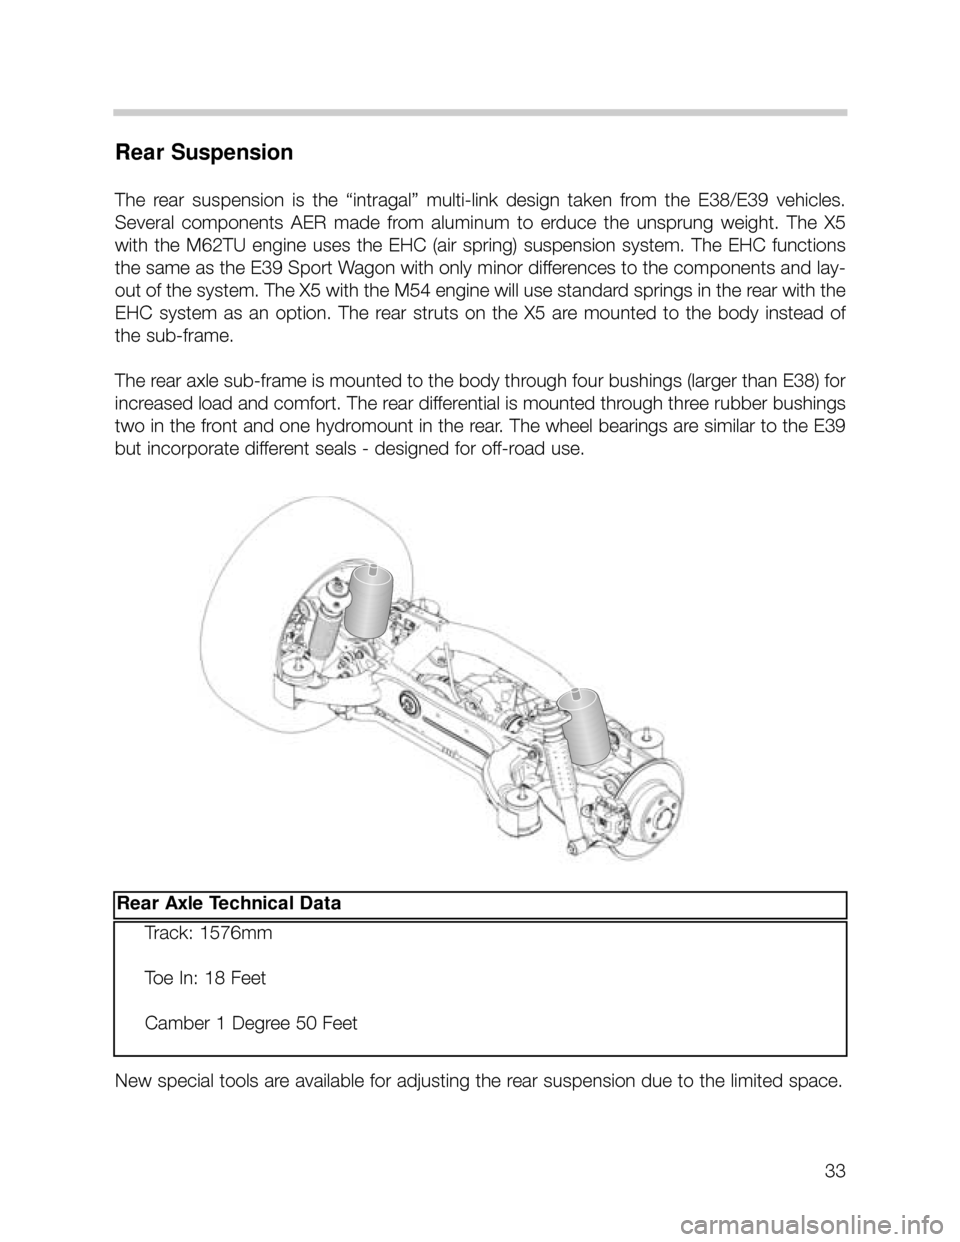 BMW X5 1999 E53 Workshop Manual 33
Rear Suspension
The  rear  suspension  is  the  “intragal”  multi-link  design  taken  from  the  E38/E39  vehicles.
Several  components  AER  made  from  aluminum  to  erduce  the  unsprung  w